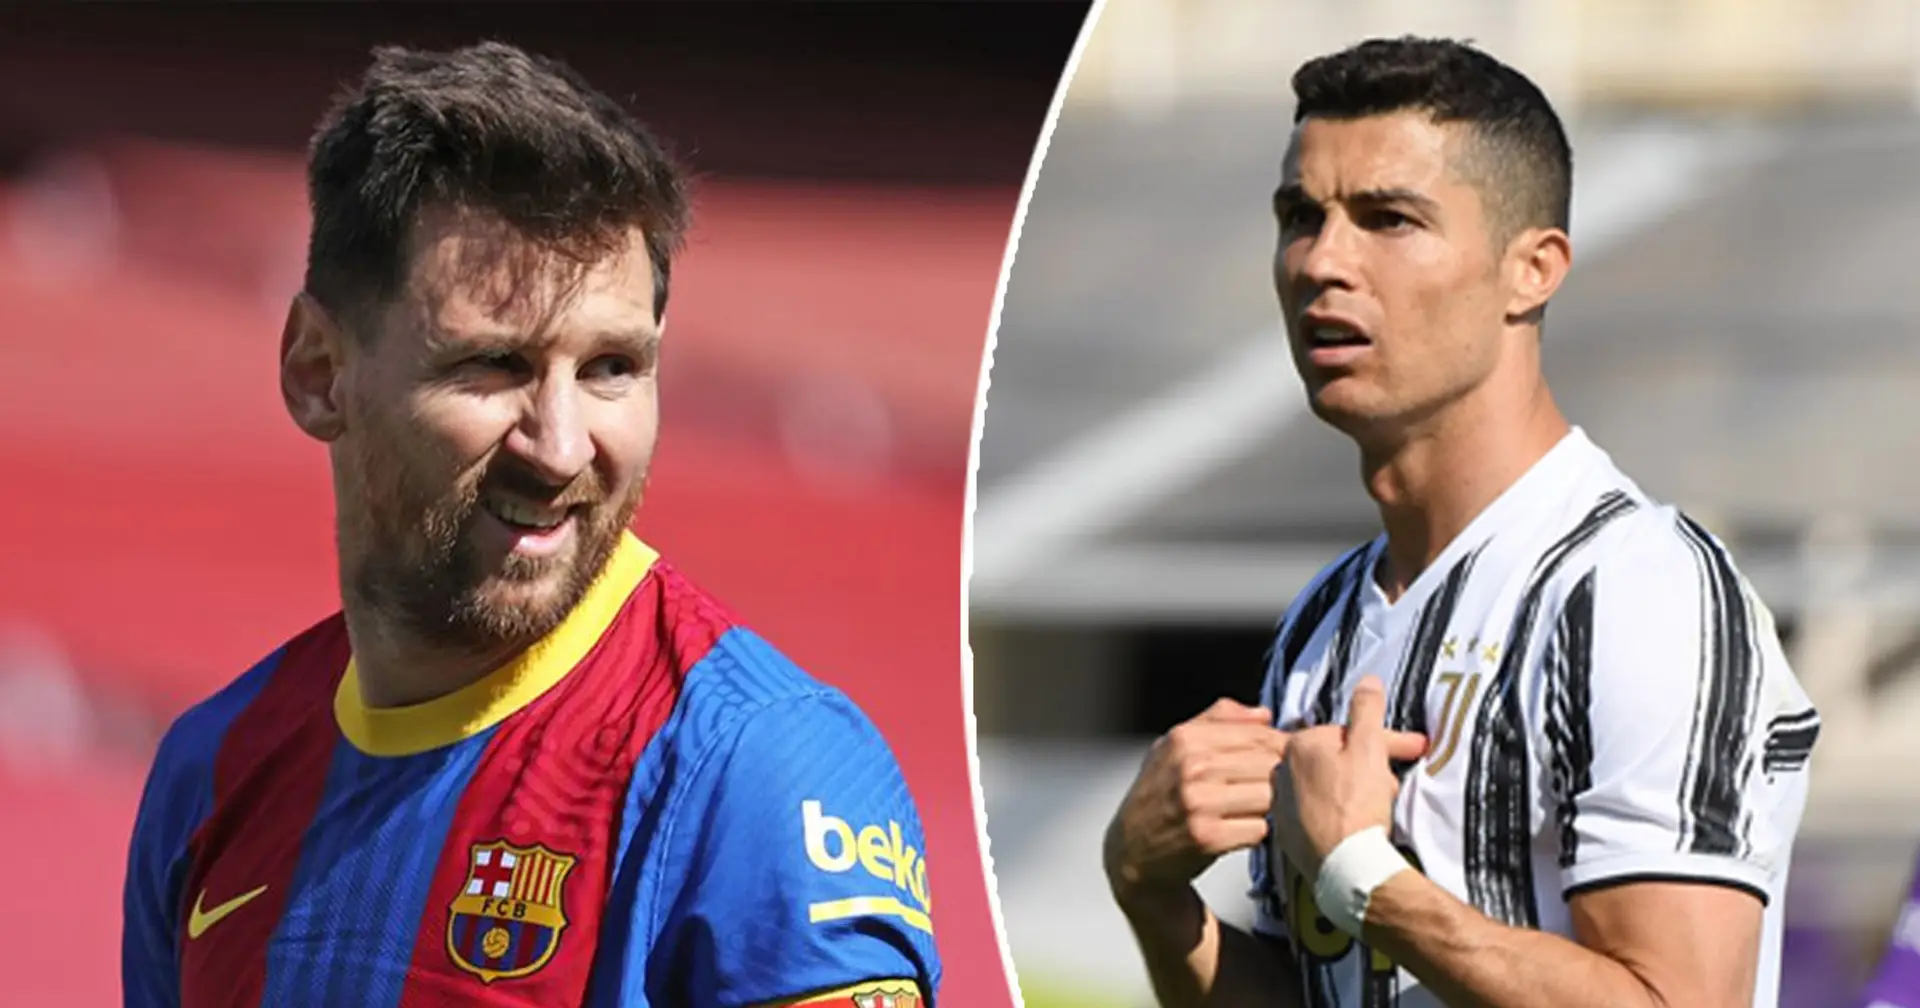 Stat of the day: Messi has more goals than Ronaldo has goals+assists in last 5 league seasons